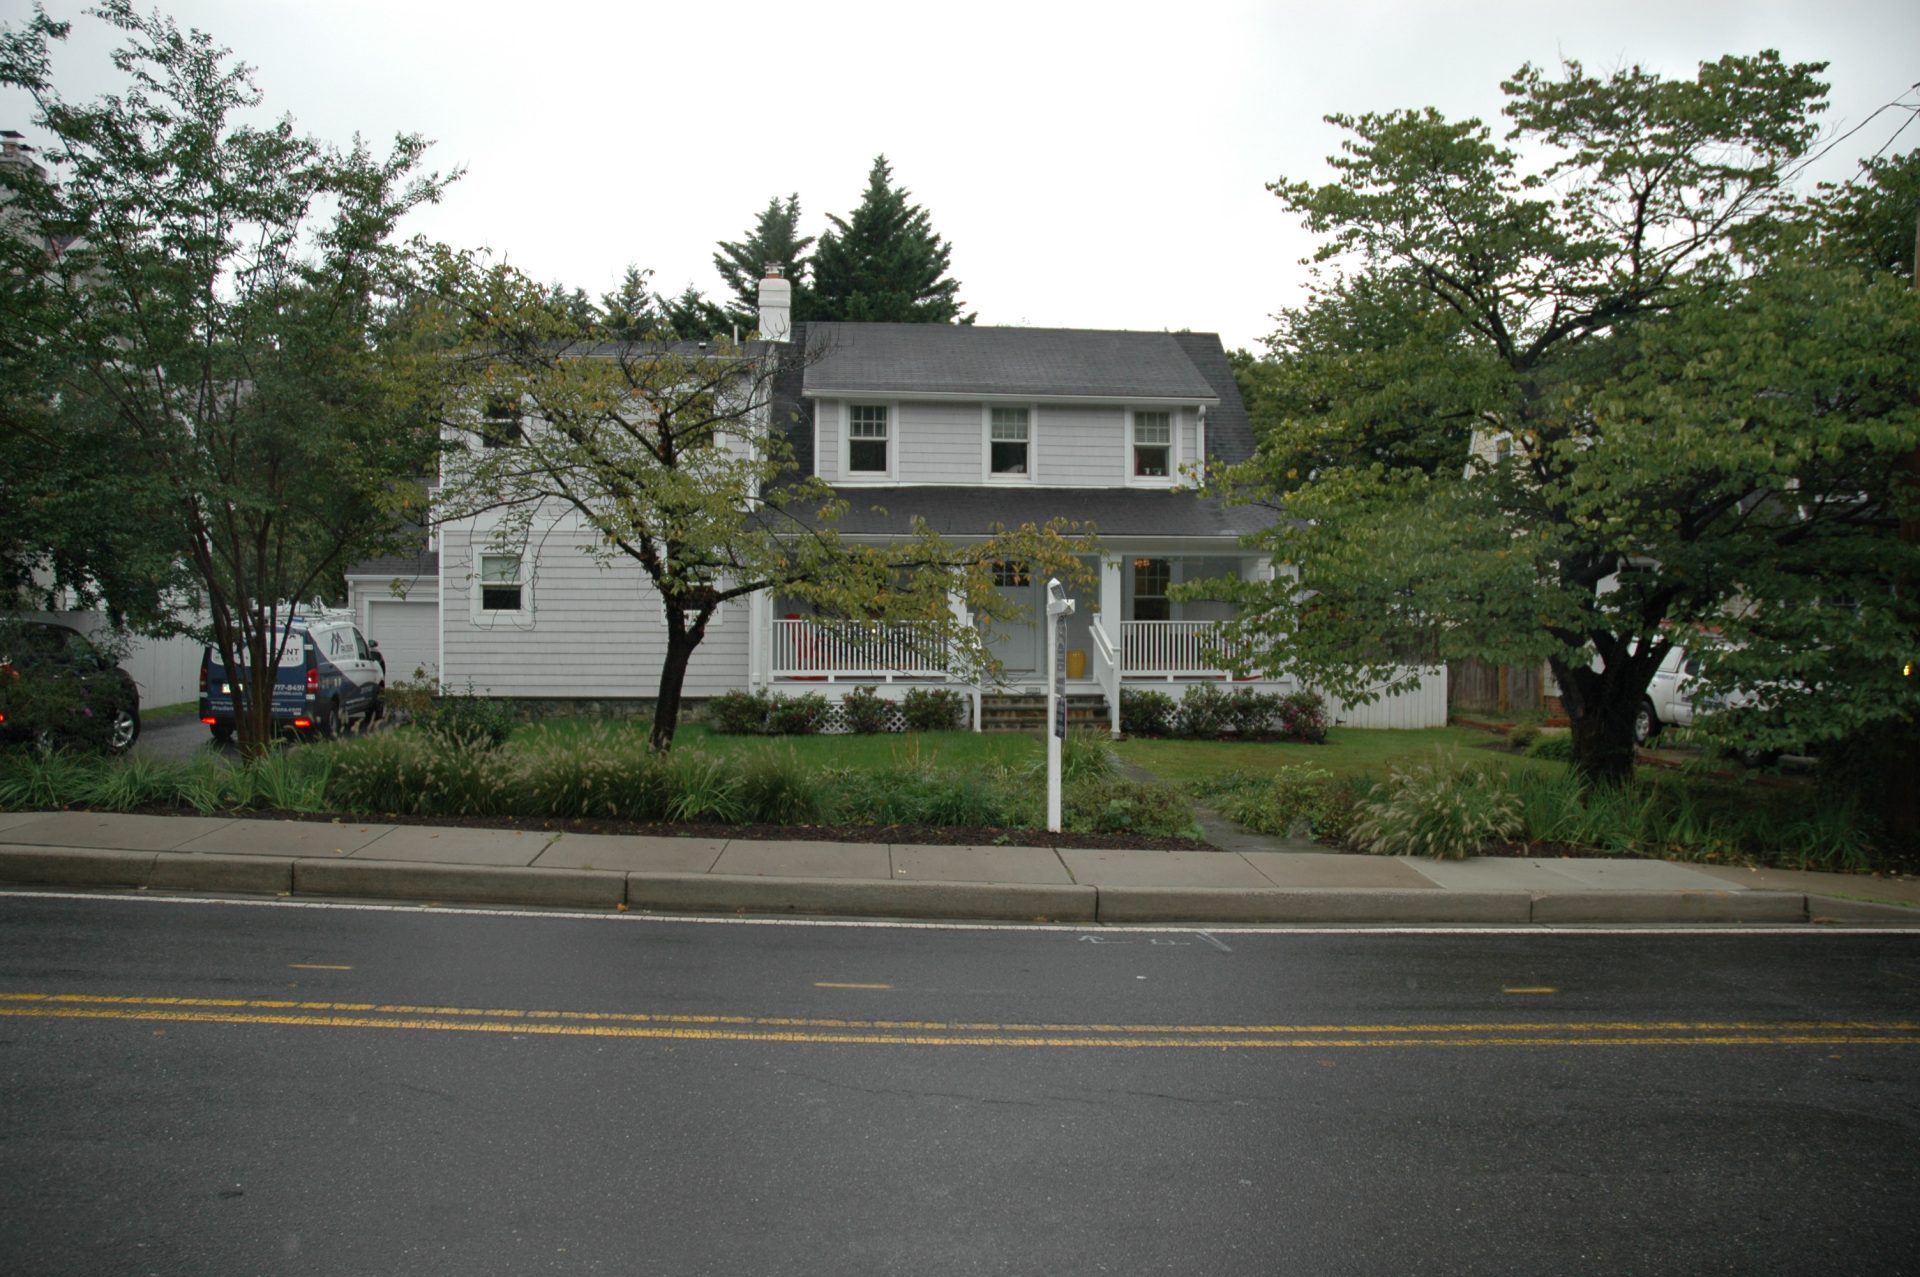 house viewed from street